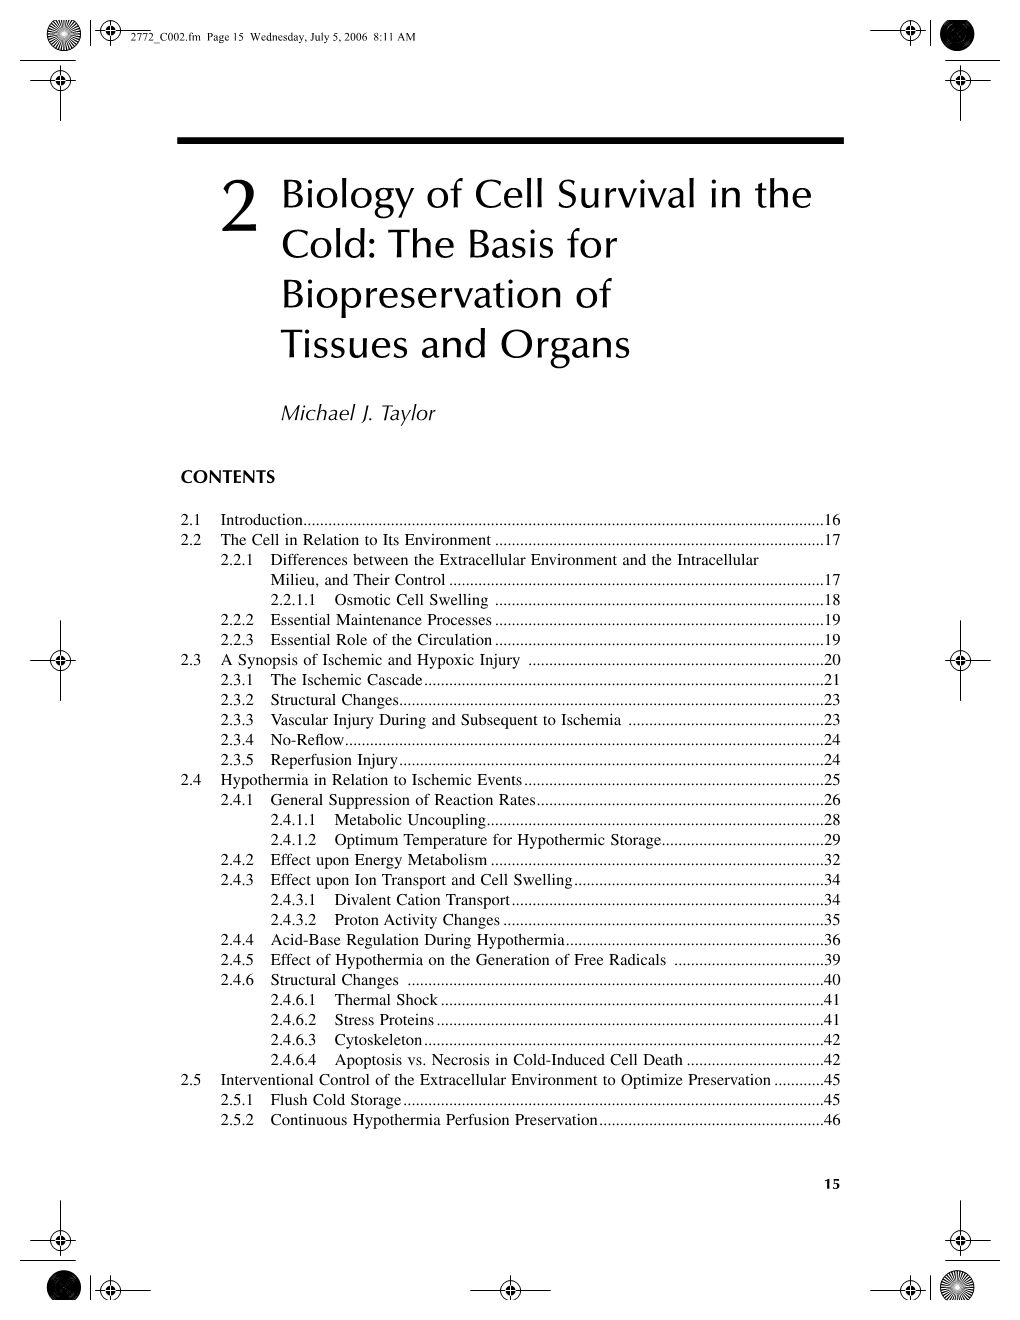 2 Biology of Cell Survival in the Cold